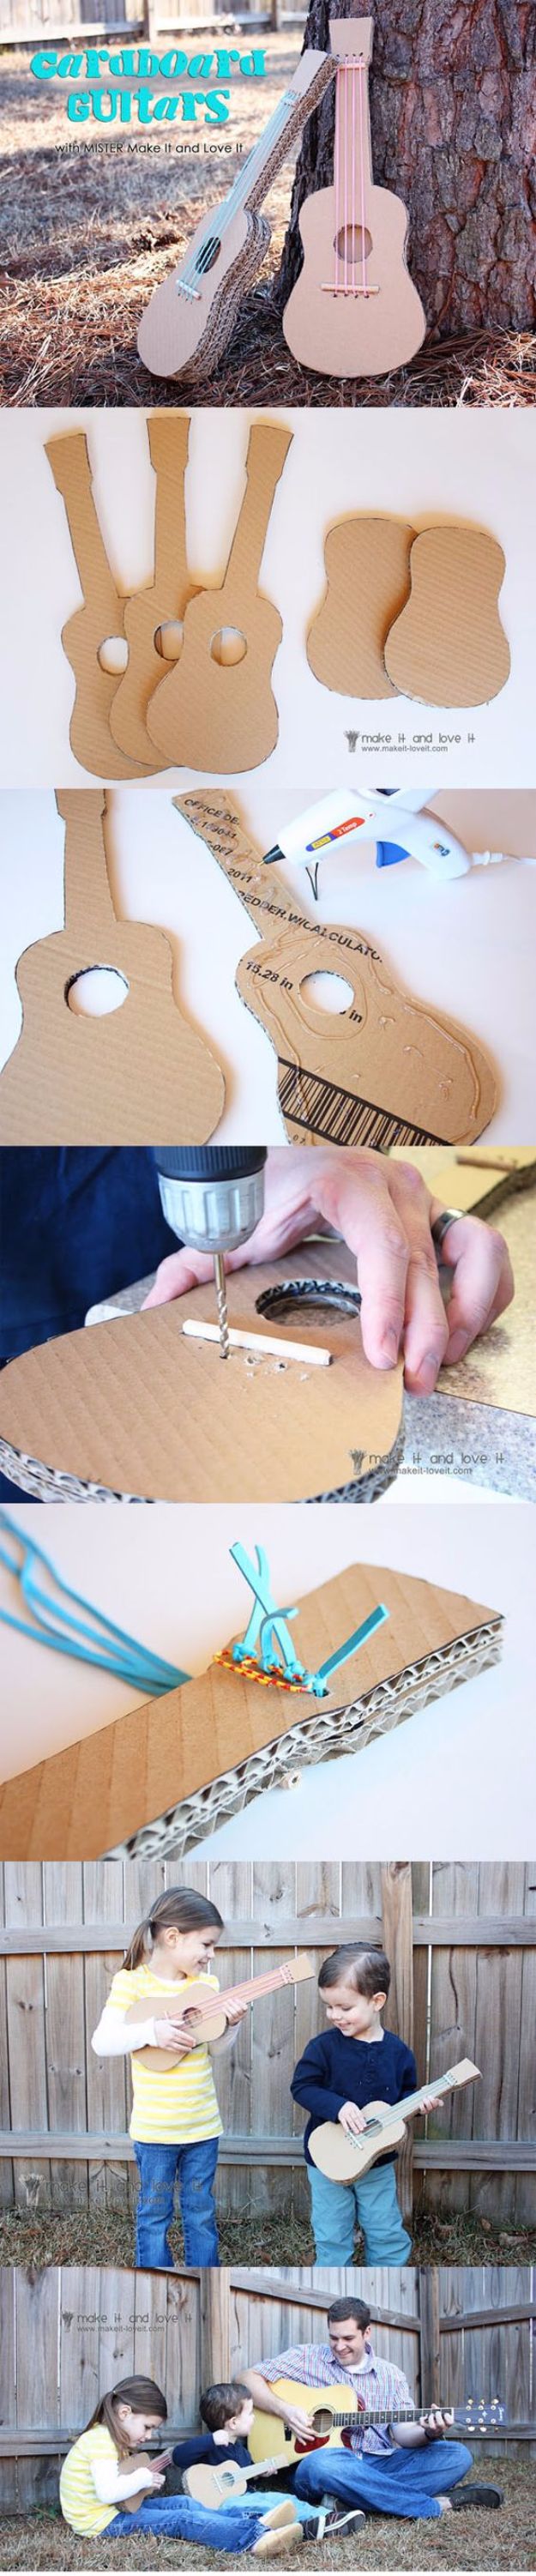 DIY Ideas With Cardboard - Cardboard Guitars - How To Make Room Decor Crafts for Kids - Easy and Crafty Storage Ideas For Room - Toilet Paper Roll Projects Tutorials - Fun Furniture Ideas with Cardboard - Cheap, Quick and Easy Wall Decorations #diyideas #cardboardcrafts #crafts